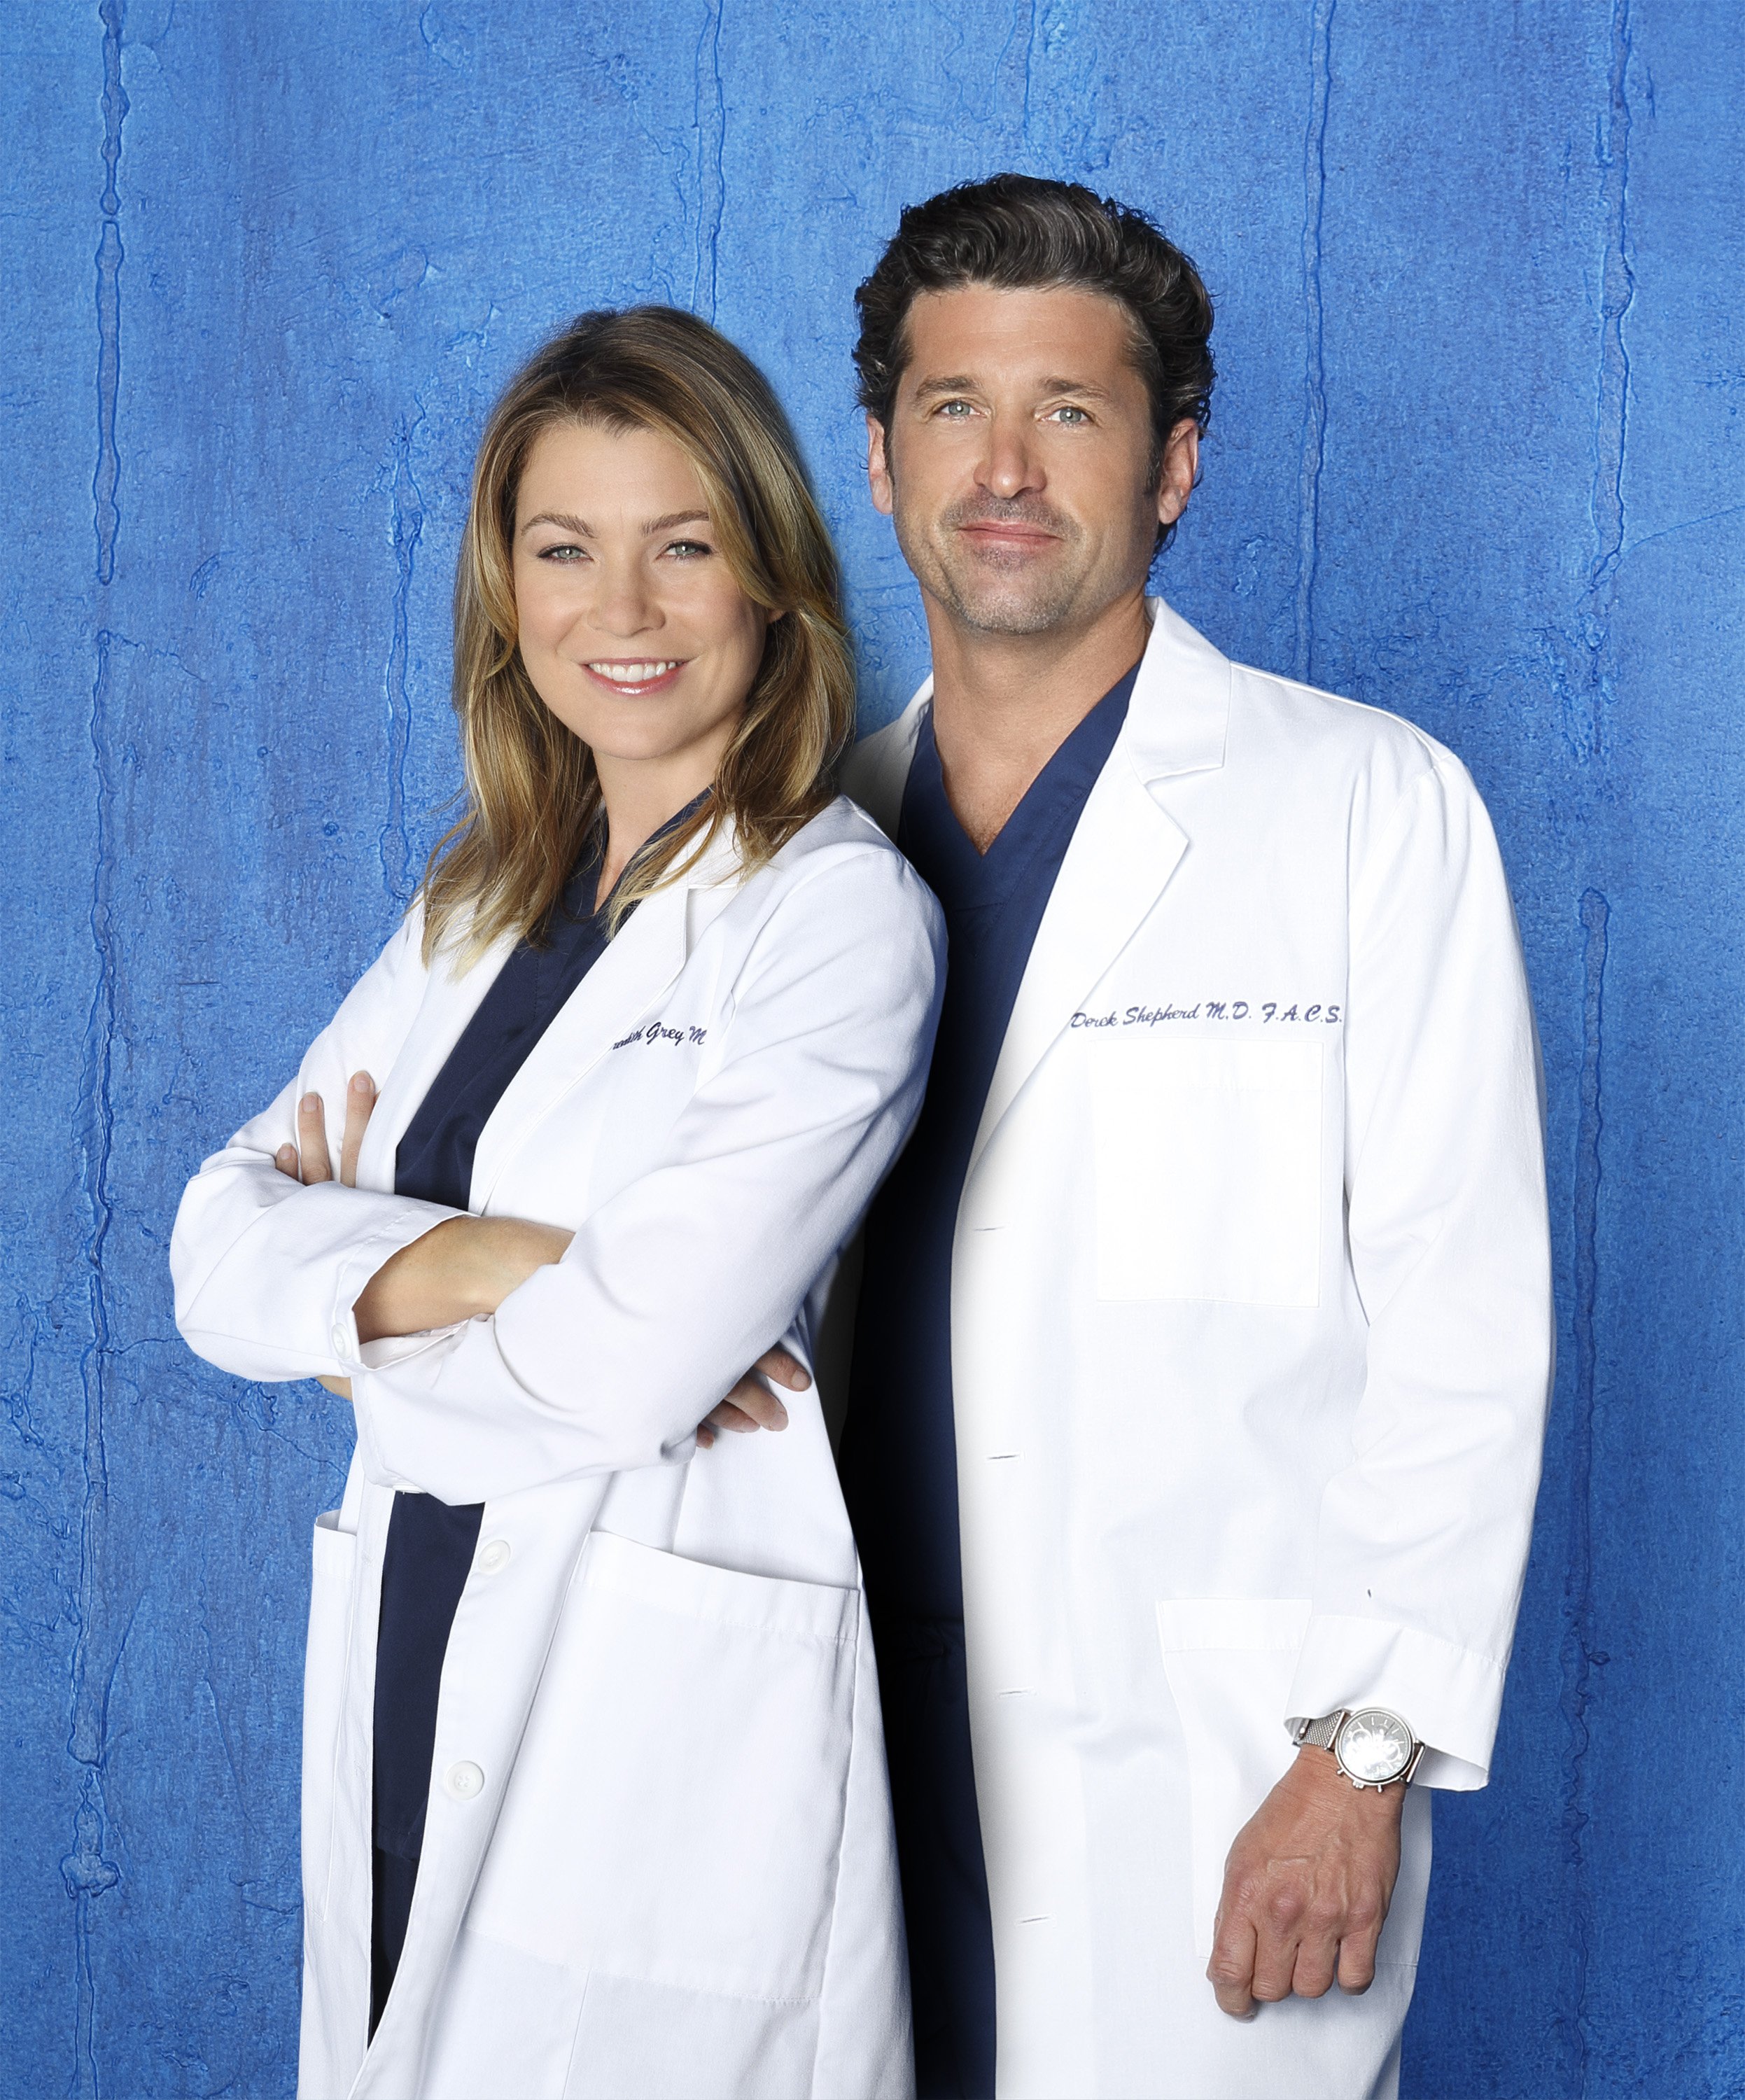 "Grey's Anatomy" stars Ellen Pompeo as Dr. Meredith Grey and Patrick Dempsey as Dr. Derek Shepherd during Season 10 of the drama series | Photo: Getty Images